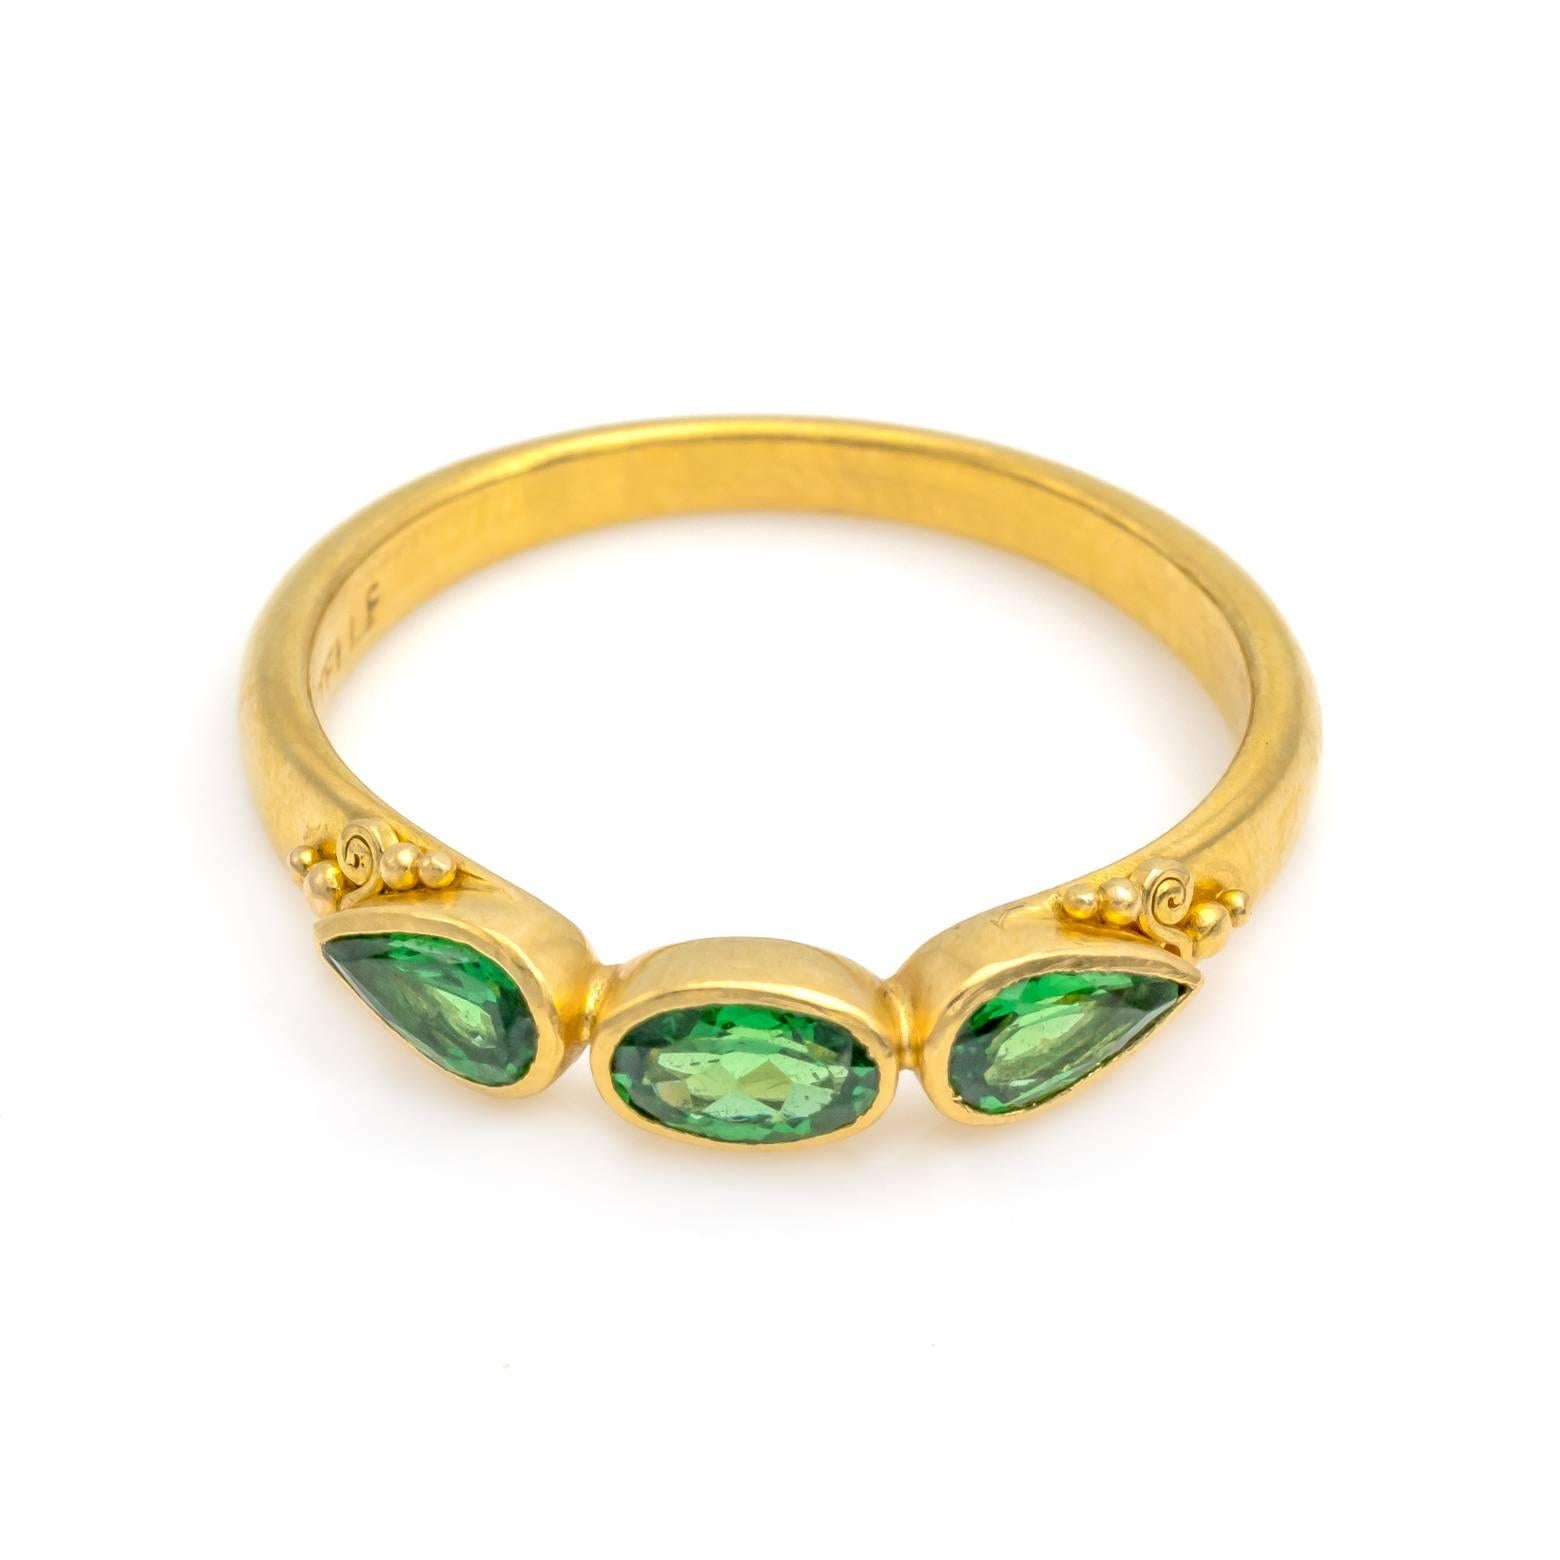 Contemporary Oval and Pear Tsavorite Green Garnet Ring in 18 Karat Gold with Granulation